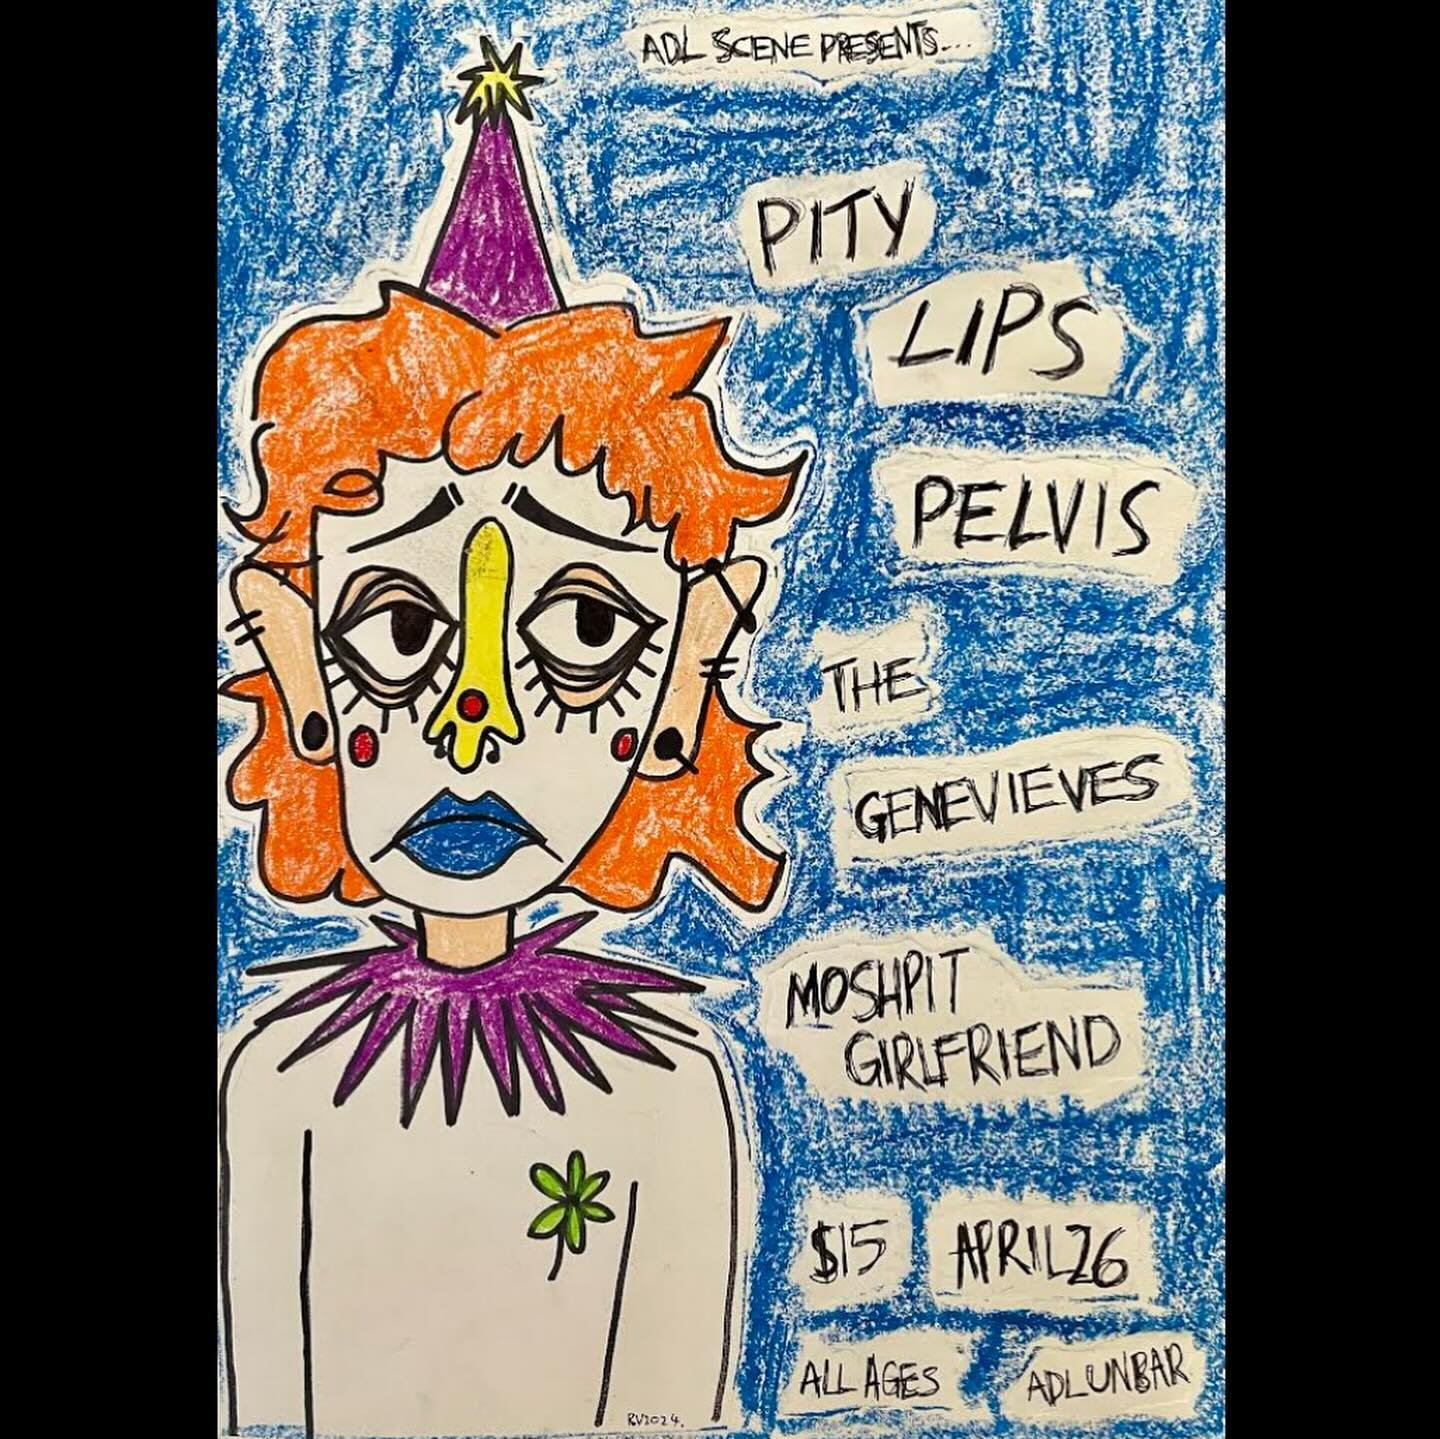 💫NEXT GIG💫

adl scene presents adl Unibar with best adl bands @pity.lips @pelvis.band @thegenevieves @moshpit_girlfriend 🎉🎉

BUY TIX ONLINE LINK IN BIO 🌀🌀